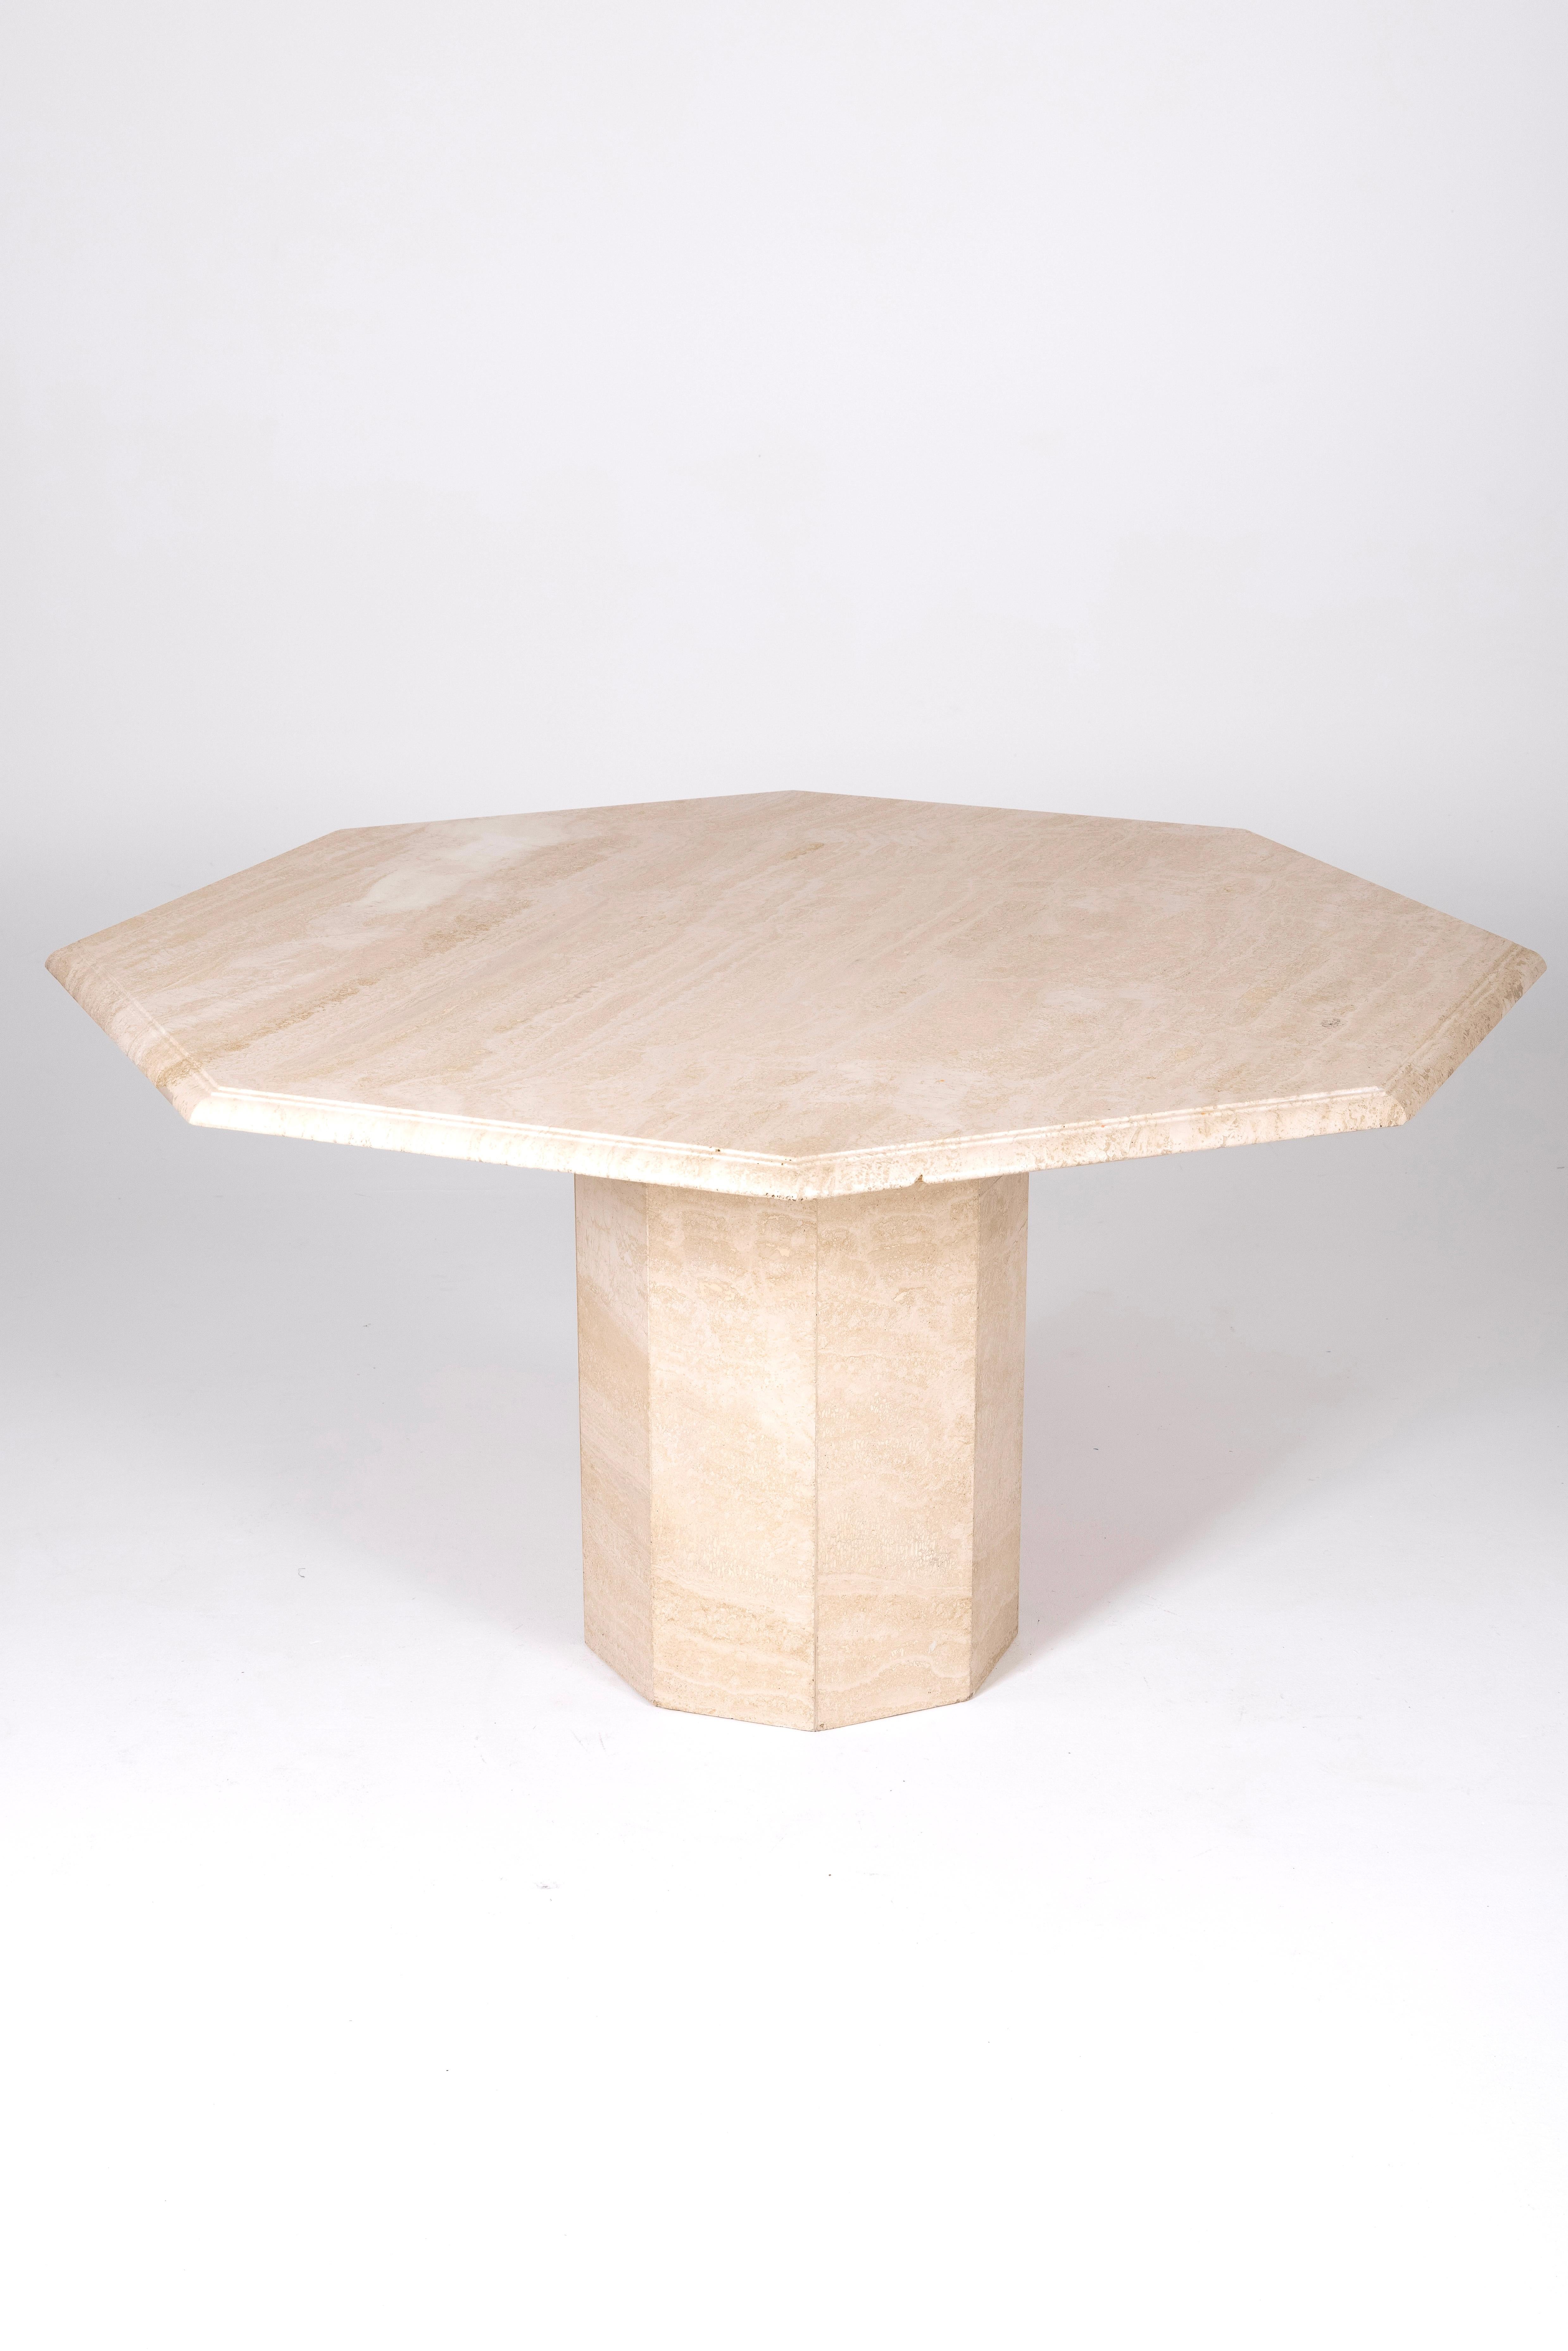 1970s octagonal travertine dining table. The tabletop and base can be separated. Some chips on the tabletop to note. Also known as 'Tuf,' travertine is a natural sedimentary limestone rock that complements well with wood, marble, or metal.

LP1486